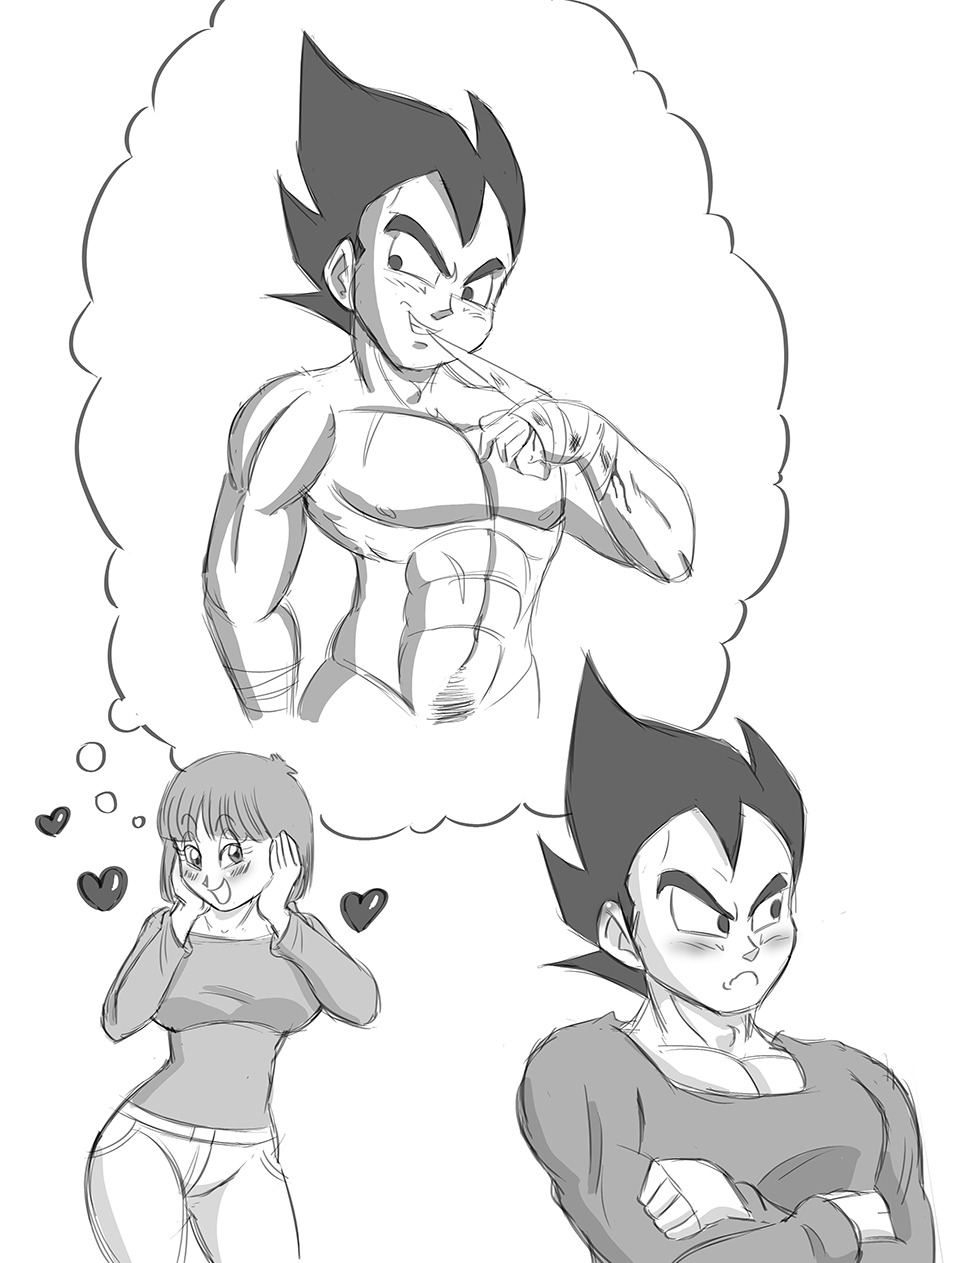  Anonymous asked funsexydragonball: Some people draw Vegeta like some sex god, and